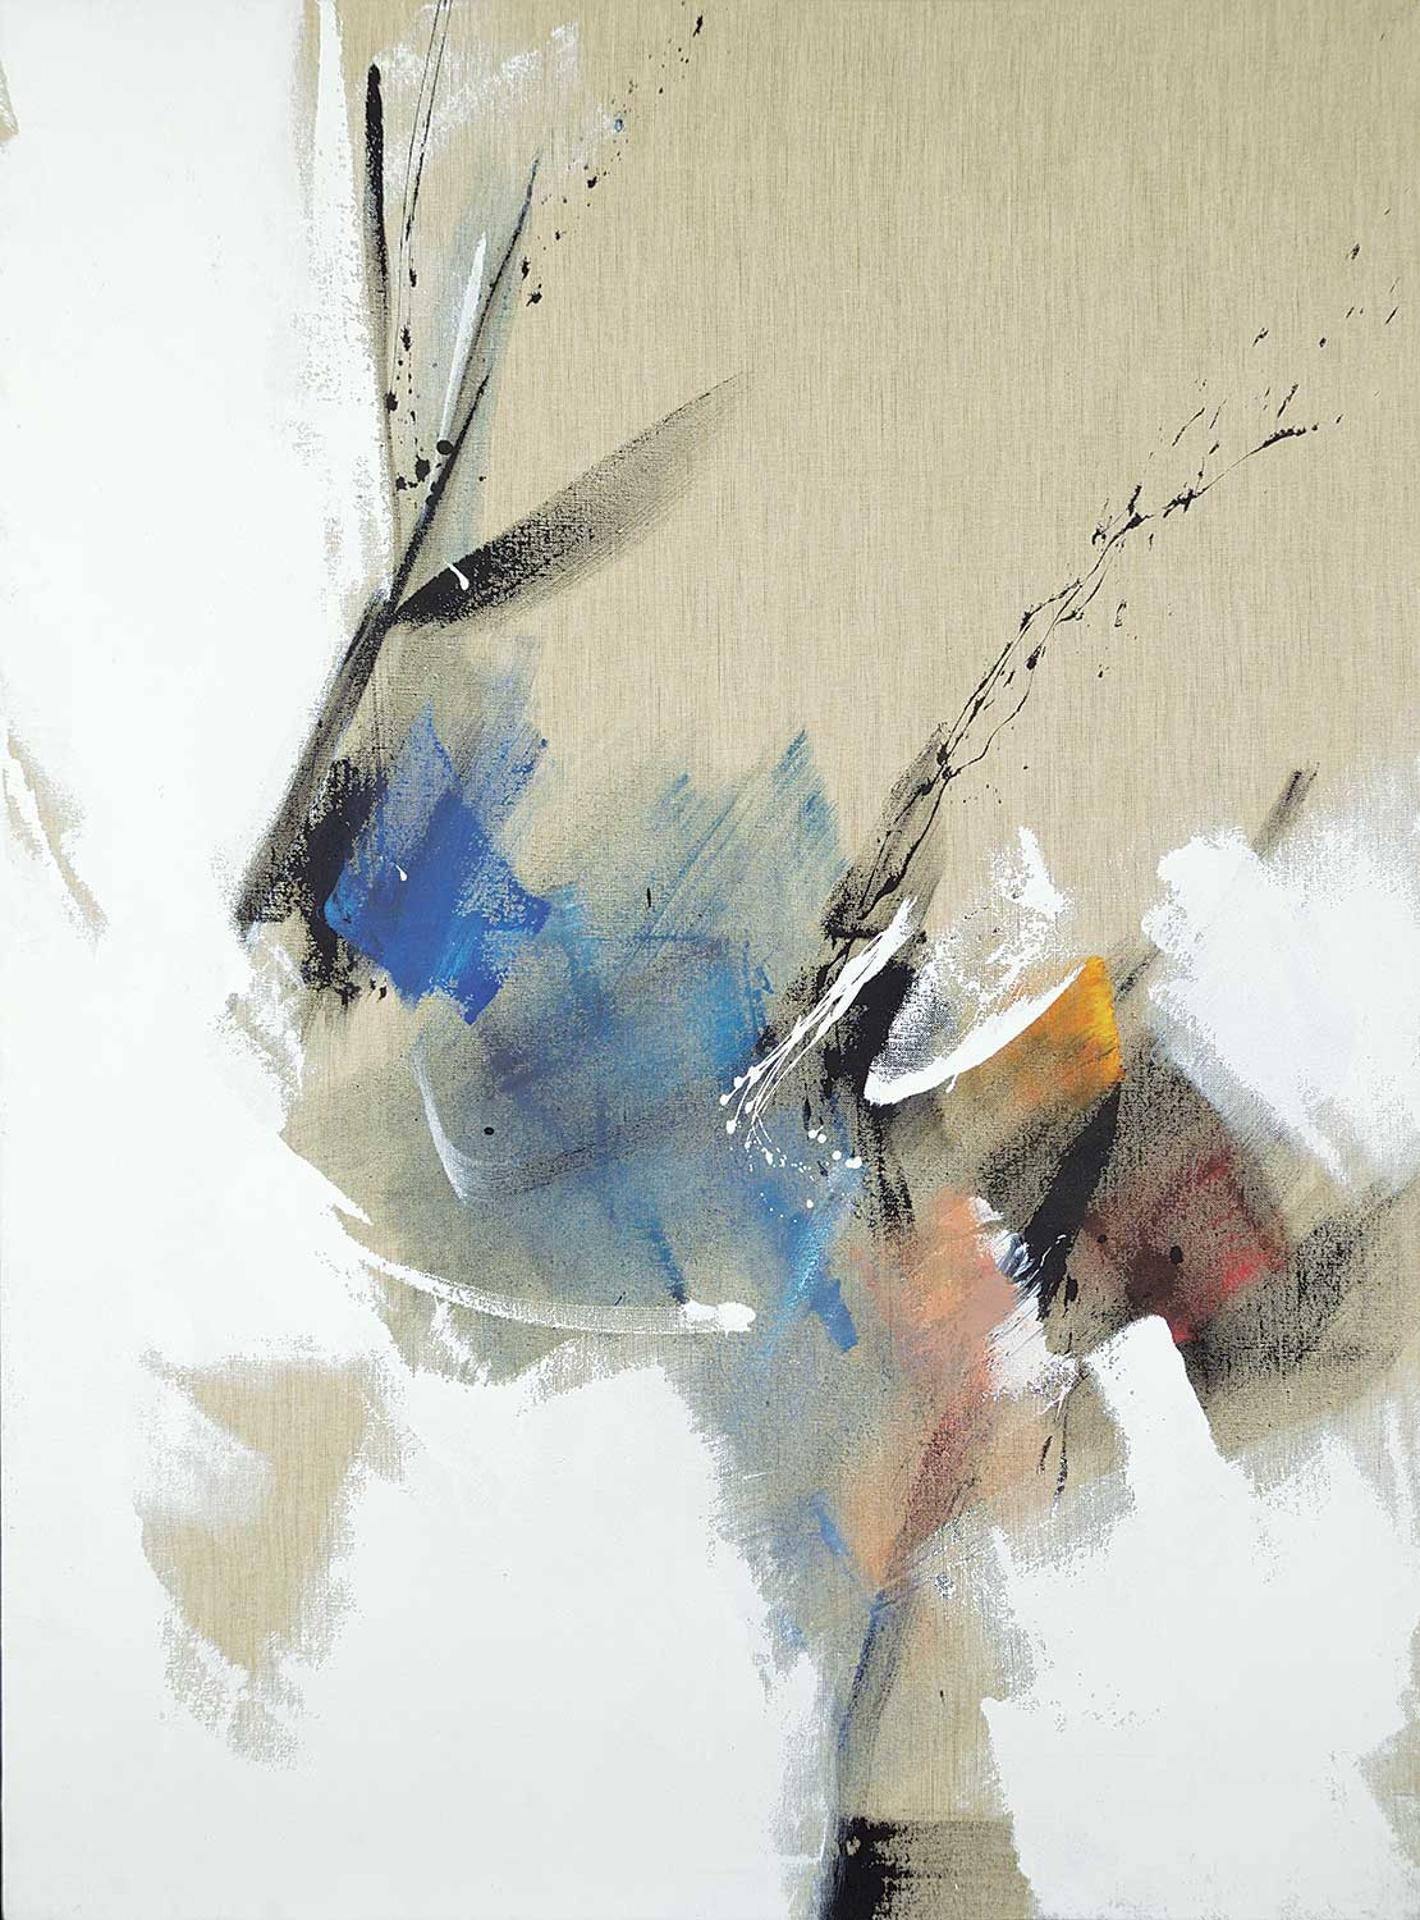 Jean Miotte - Untitled - Blue, White and Black Strokes